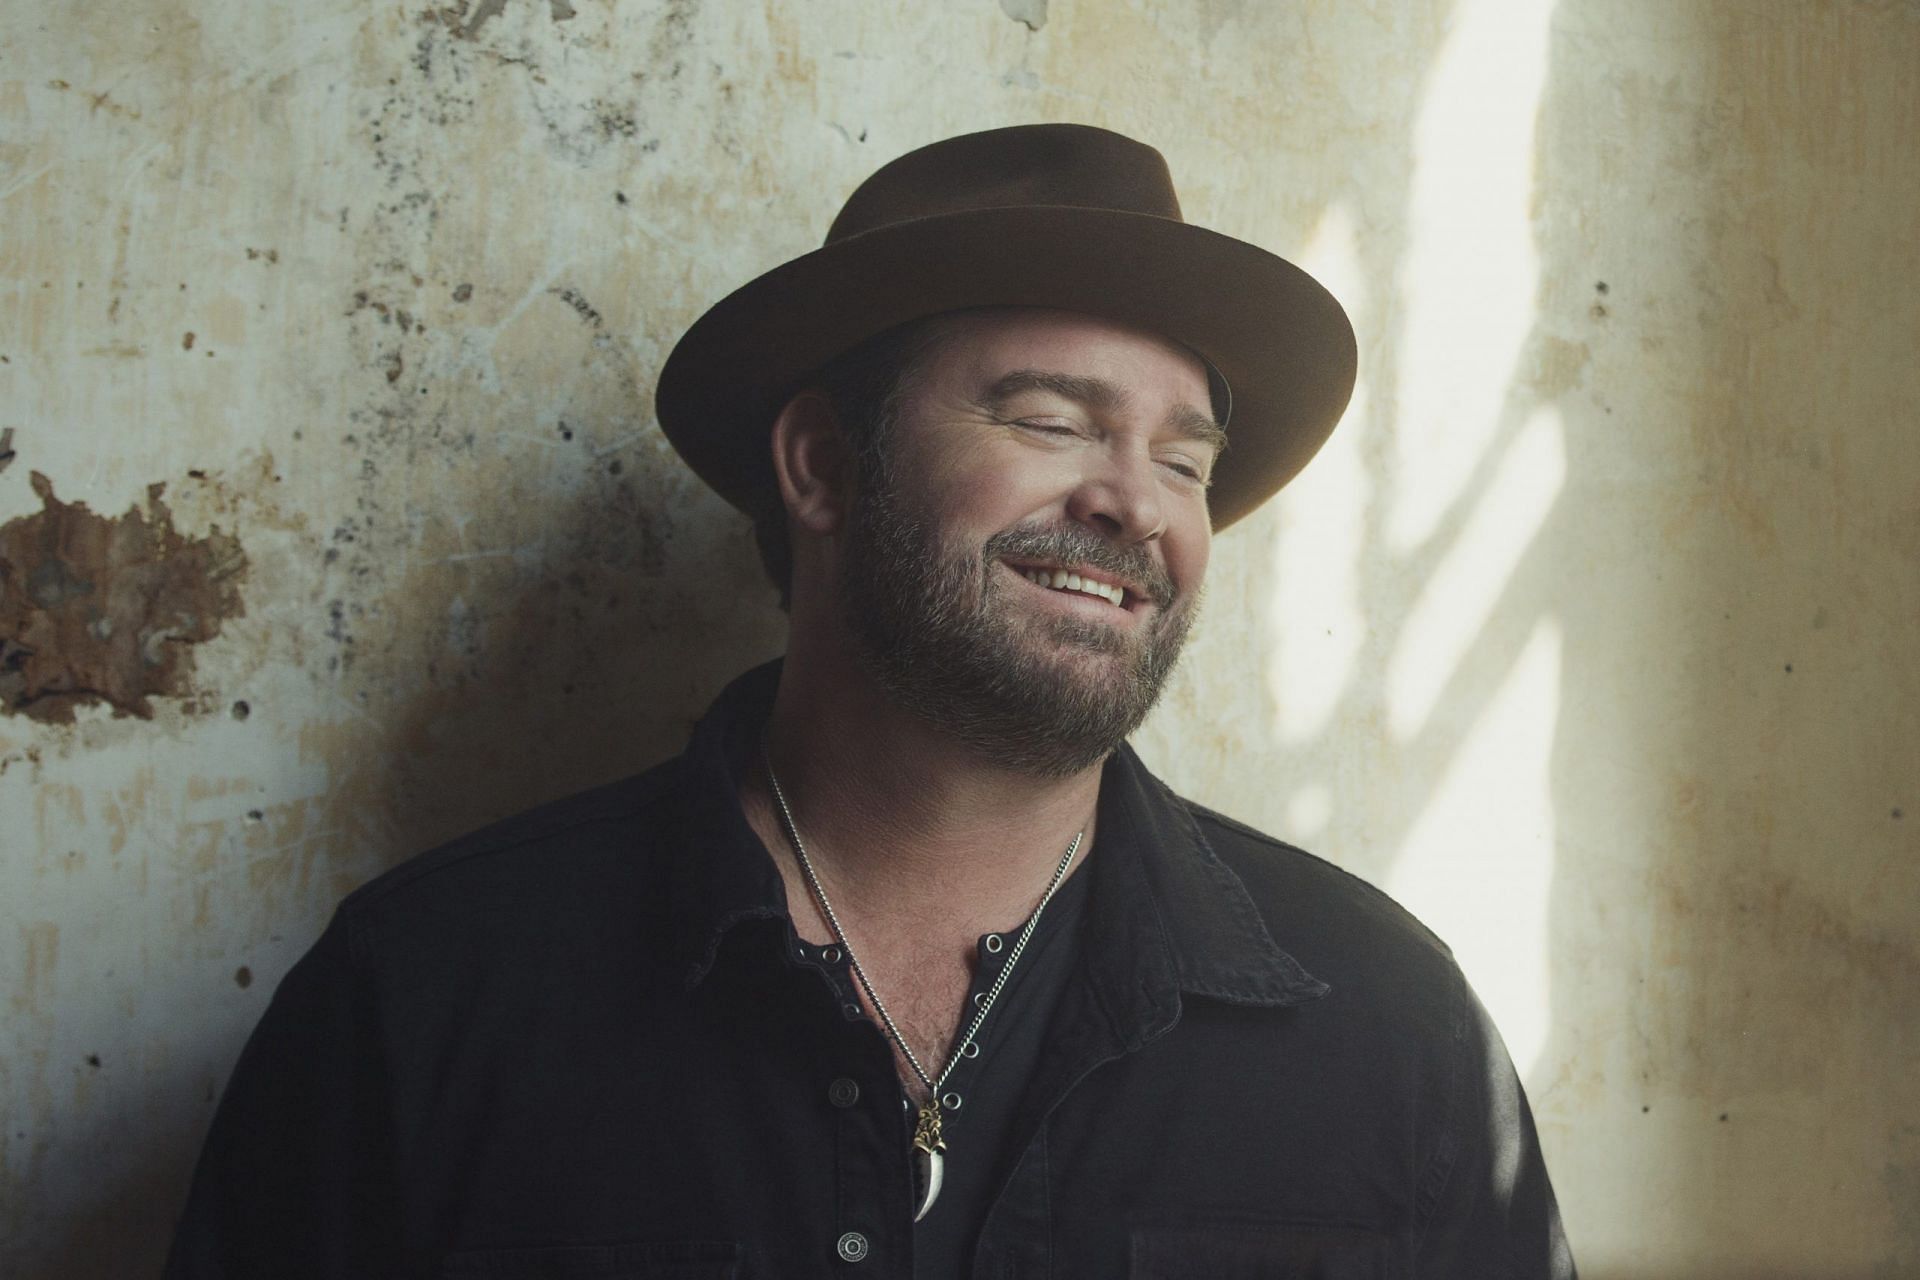 Country music star Lee Brice